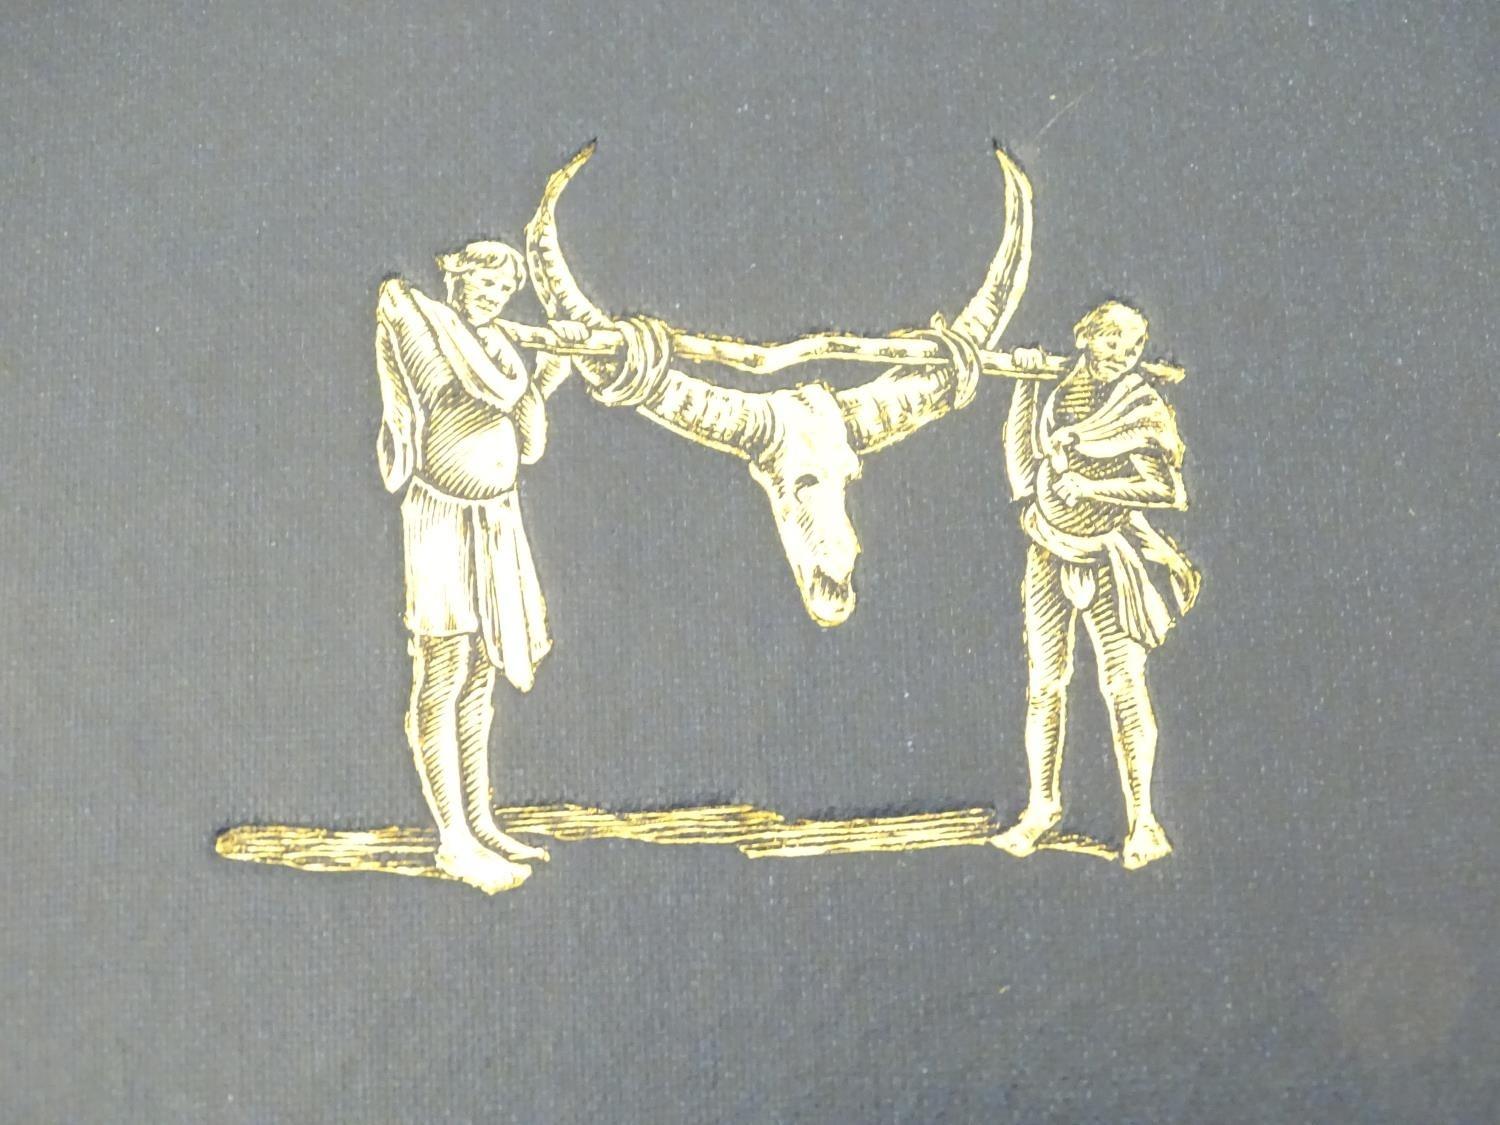 Book: First Edition copy of 'Days and Nights with Indian Big Game' by Major-General A. E. Wardrop, - Image 3 of 7